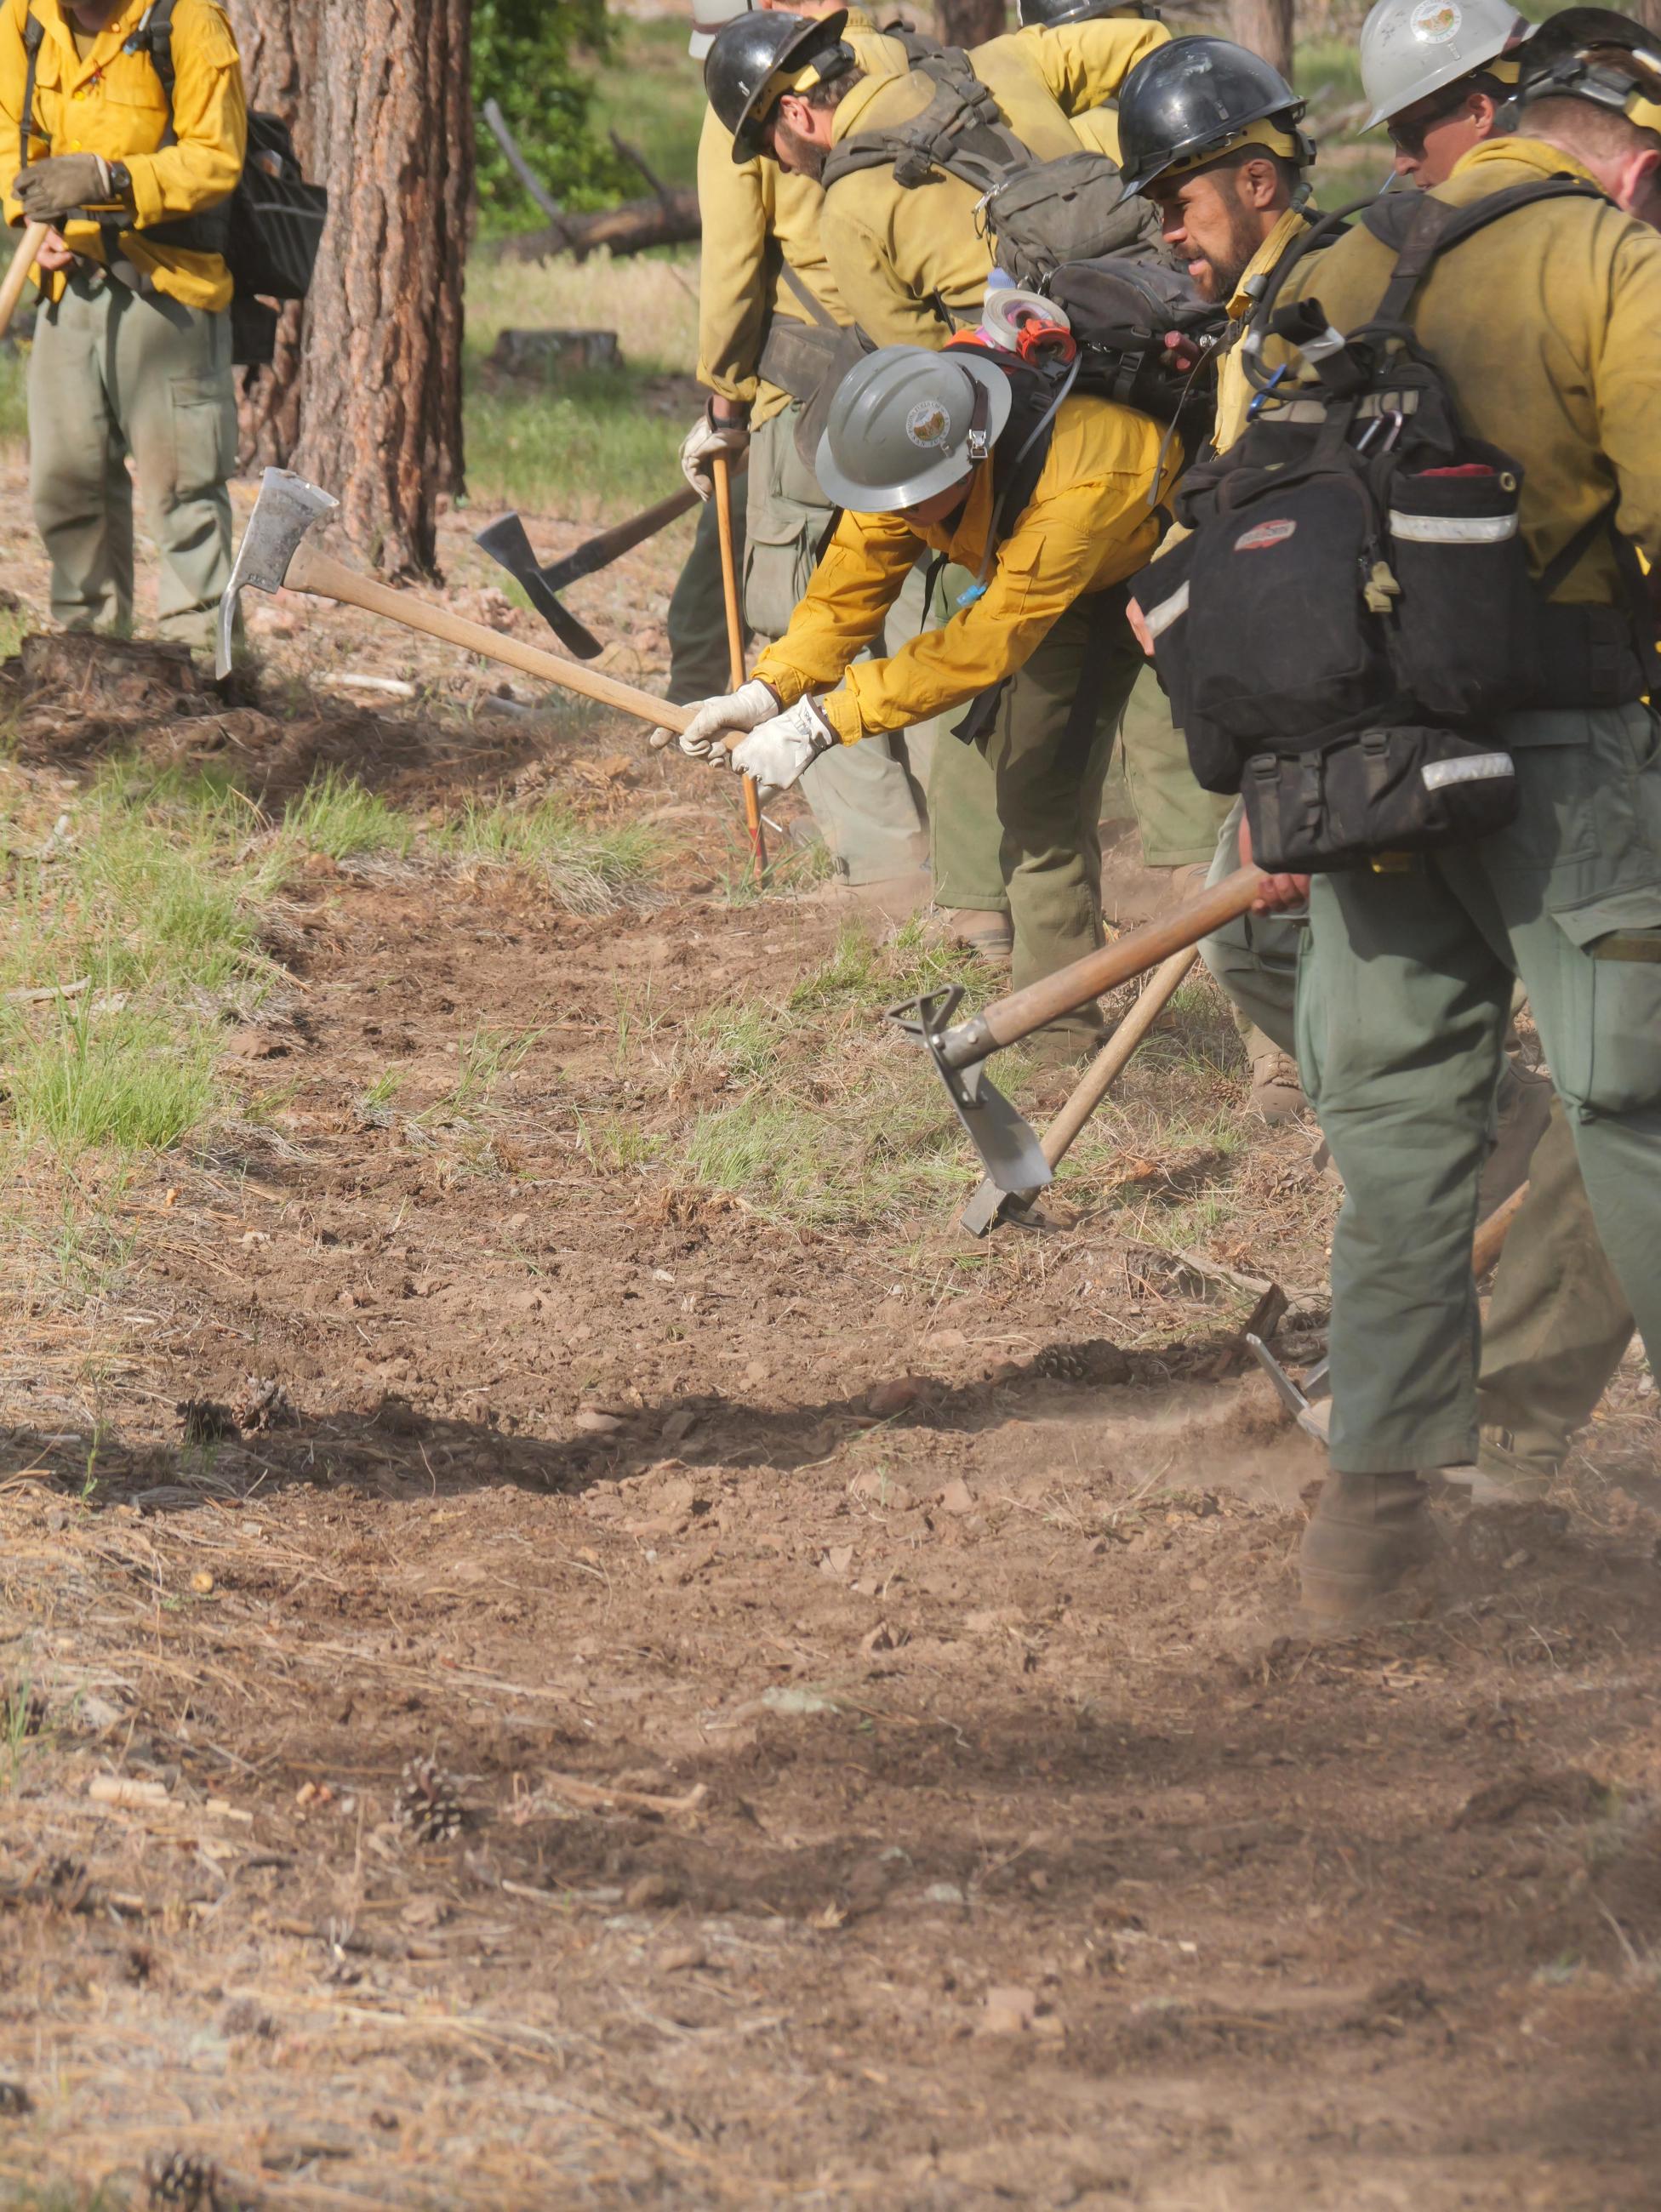 Fire personnel use hand tools to scratch away vegetation and create a fire line